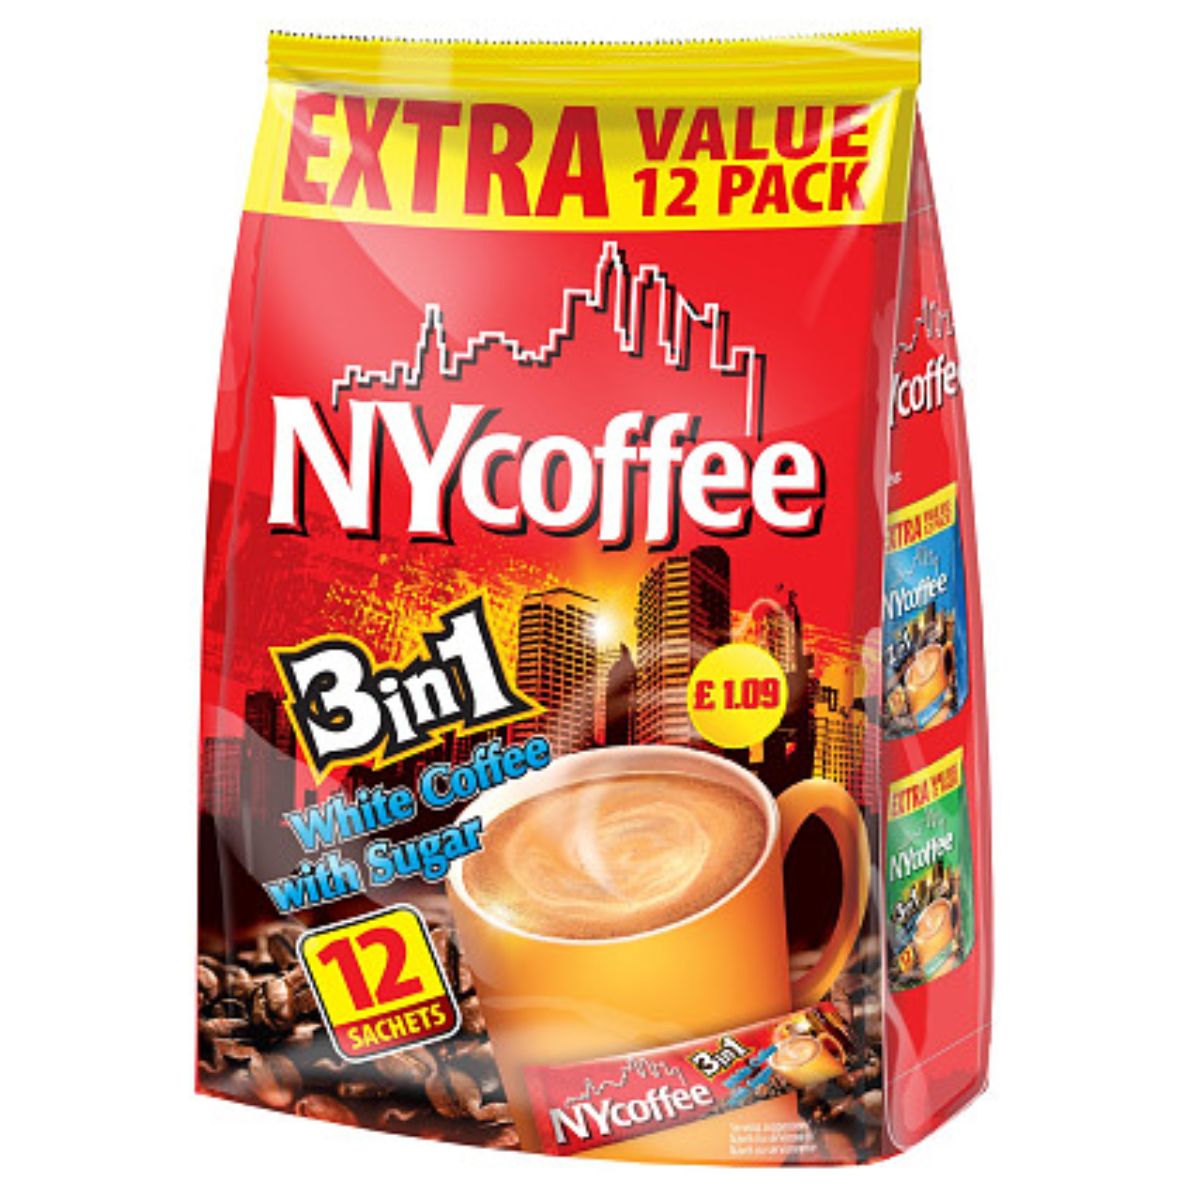 A bag of Nycoffee - 3 in 1 White Coffee with Sugar - 12 Sachets with a cup of coffee.